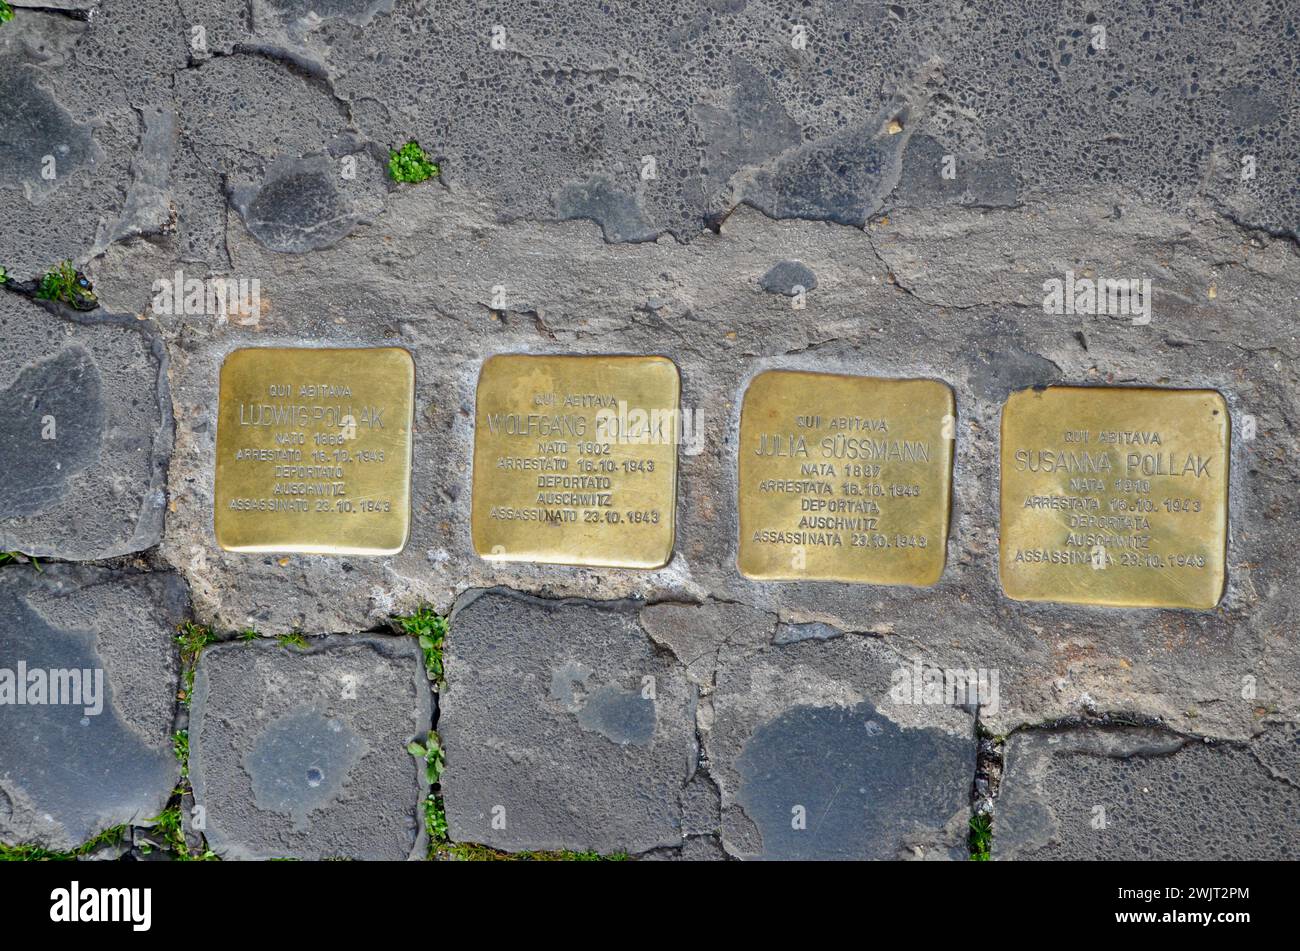 bronze metal plaques set in the cobbled street mark where jewish italians lived before being deported and killed at auschwitz concentration camp in rome capital of italy EU Stock Photo